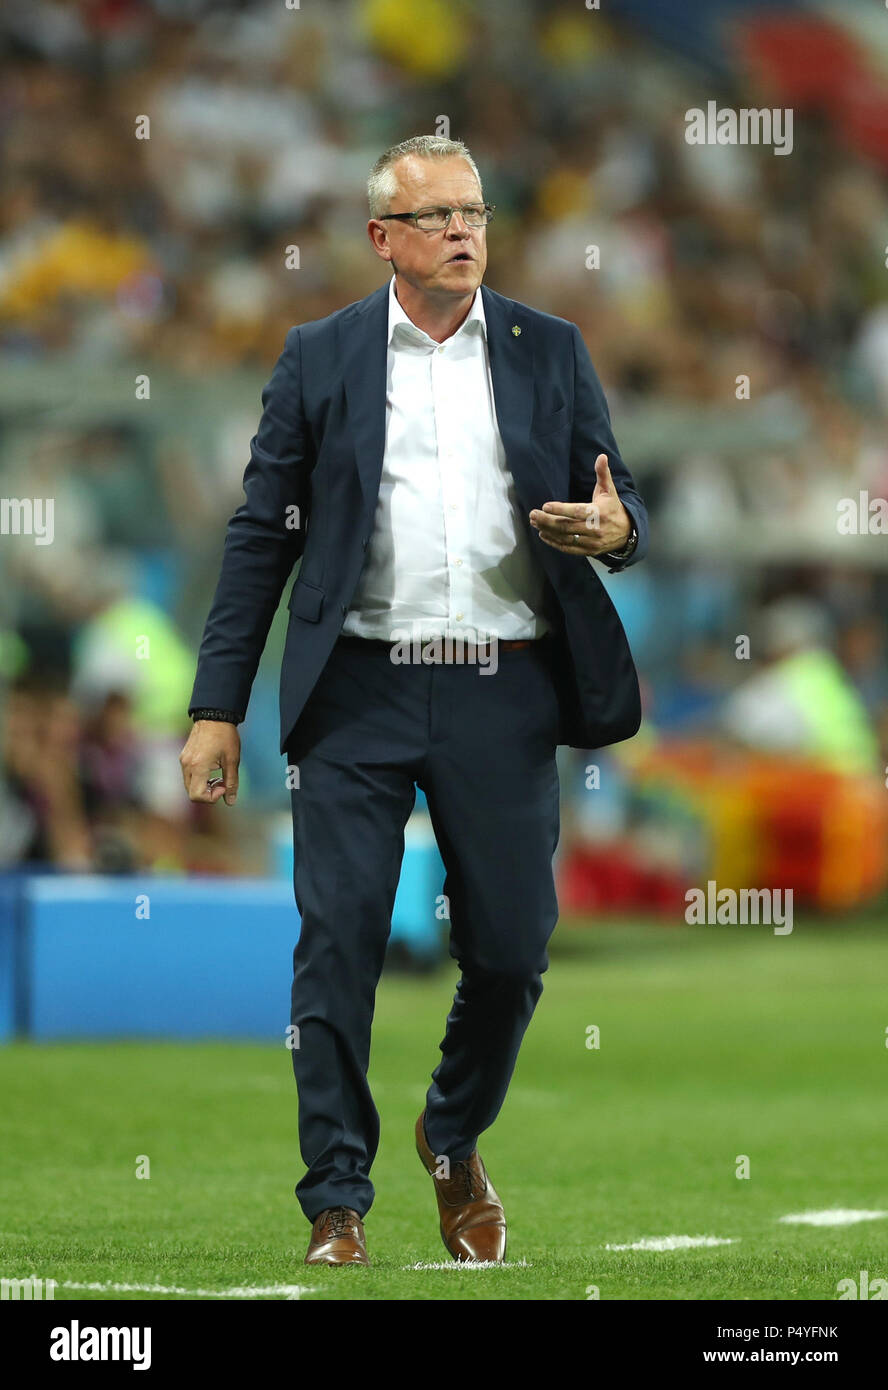 Sochi, Russia. 23rd June, 2018. Head coach Janne Andersson of Sweden is seen during the 2018 FIFA World Cup Group F match between Germany and Sweden in Sochi, Russia, June 23, 2018. Credit: Fei Maohua/Xinhua/Alamy Live News Stock Photo